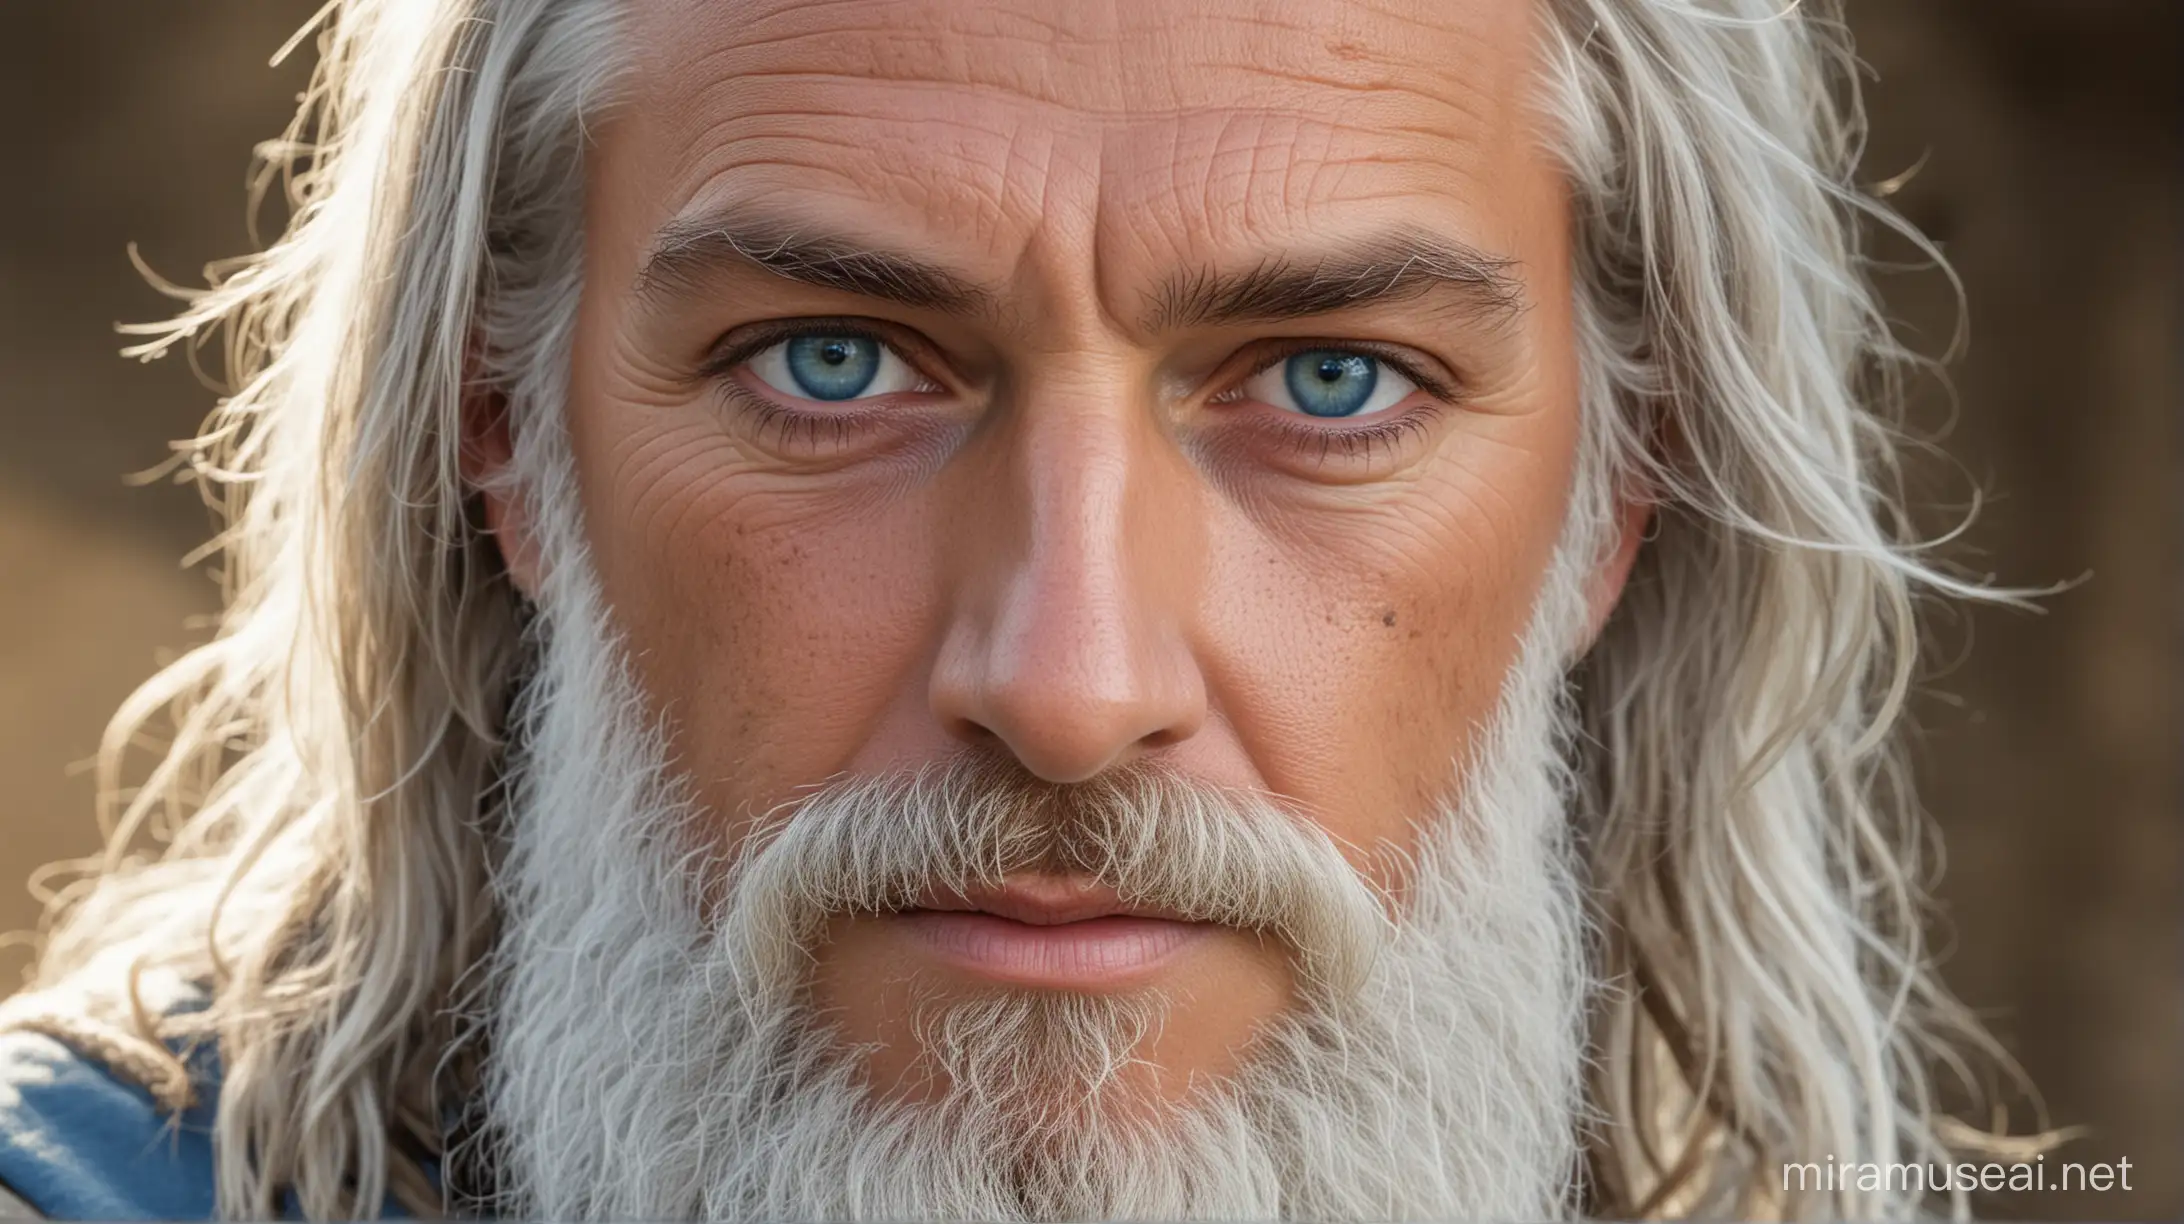 Enoch Bible Character with Blue Eyes and Intense Stare